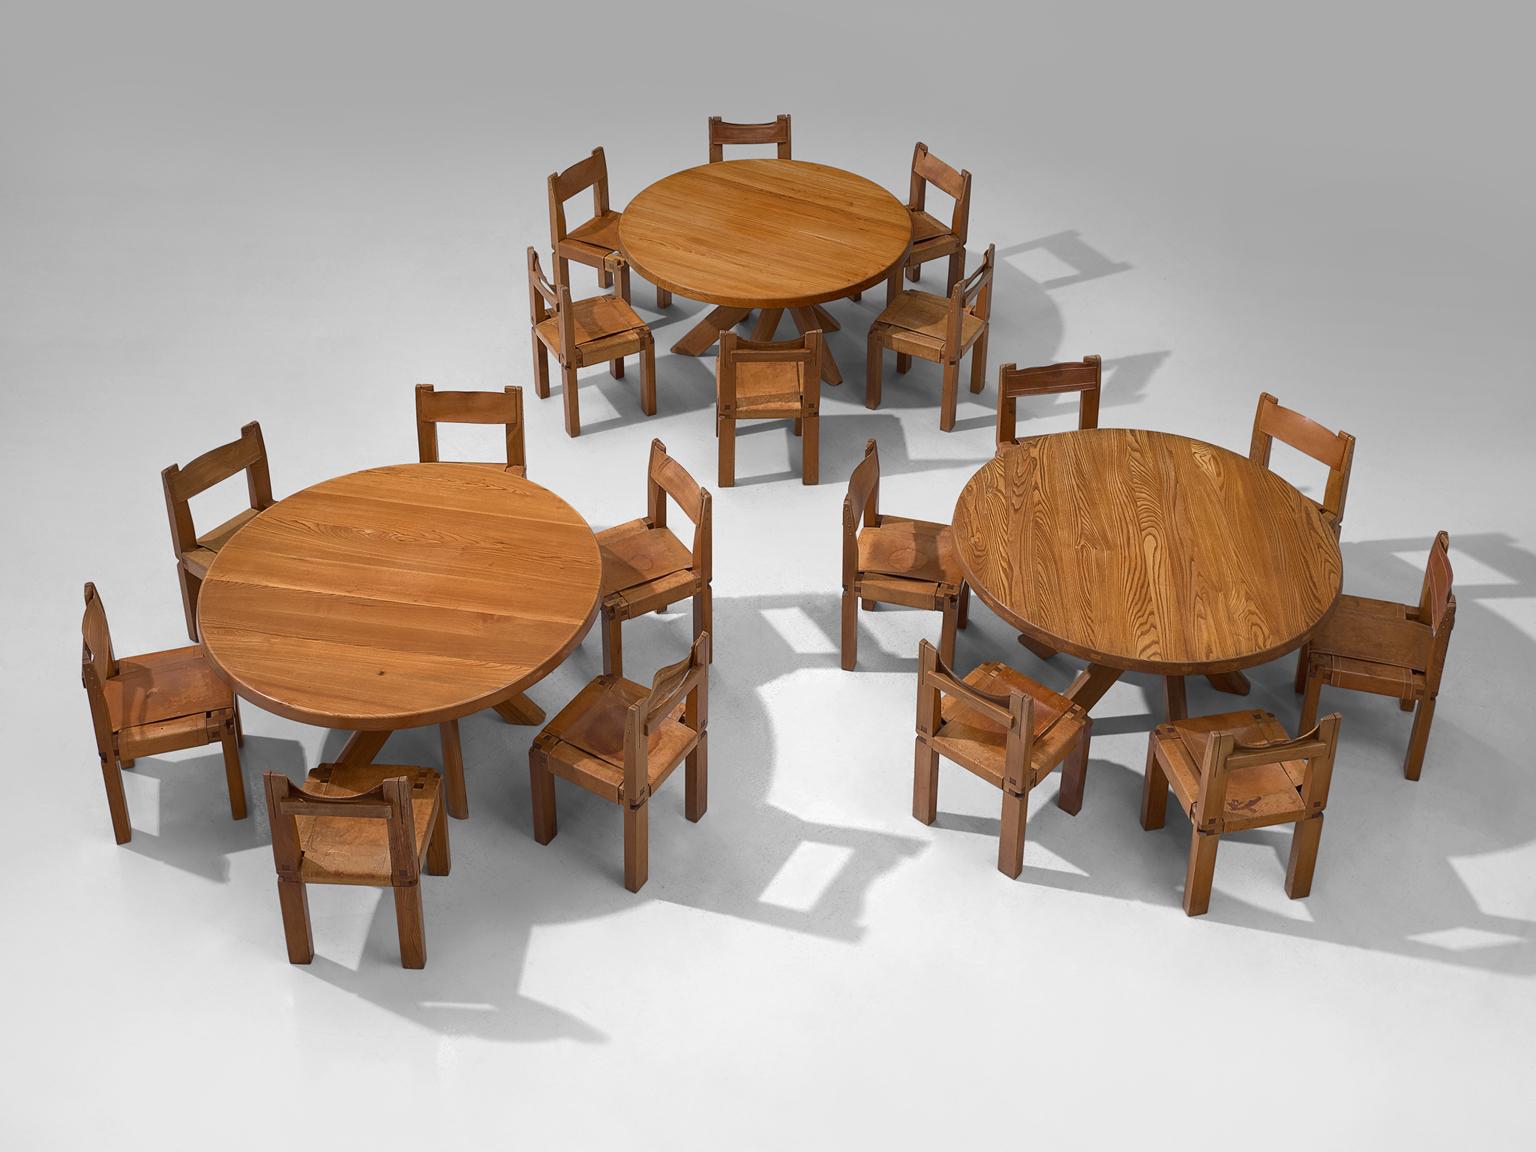 Pierre Chapo, three dining room tables with T21D tables, solid elm and leather, France, 1960s.

These three dining tables are designed by French designer Pierre Chapo. The pieces are the T21 model and the chairs (which are not included) are S11